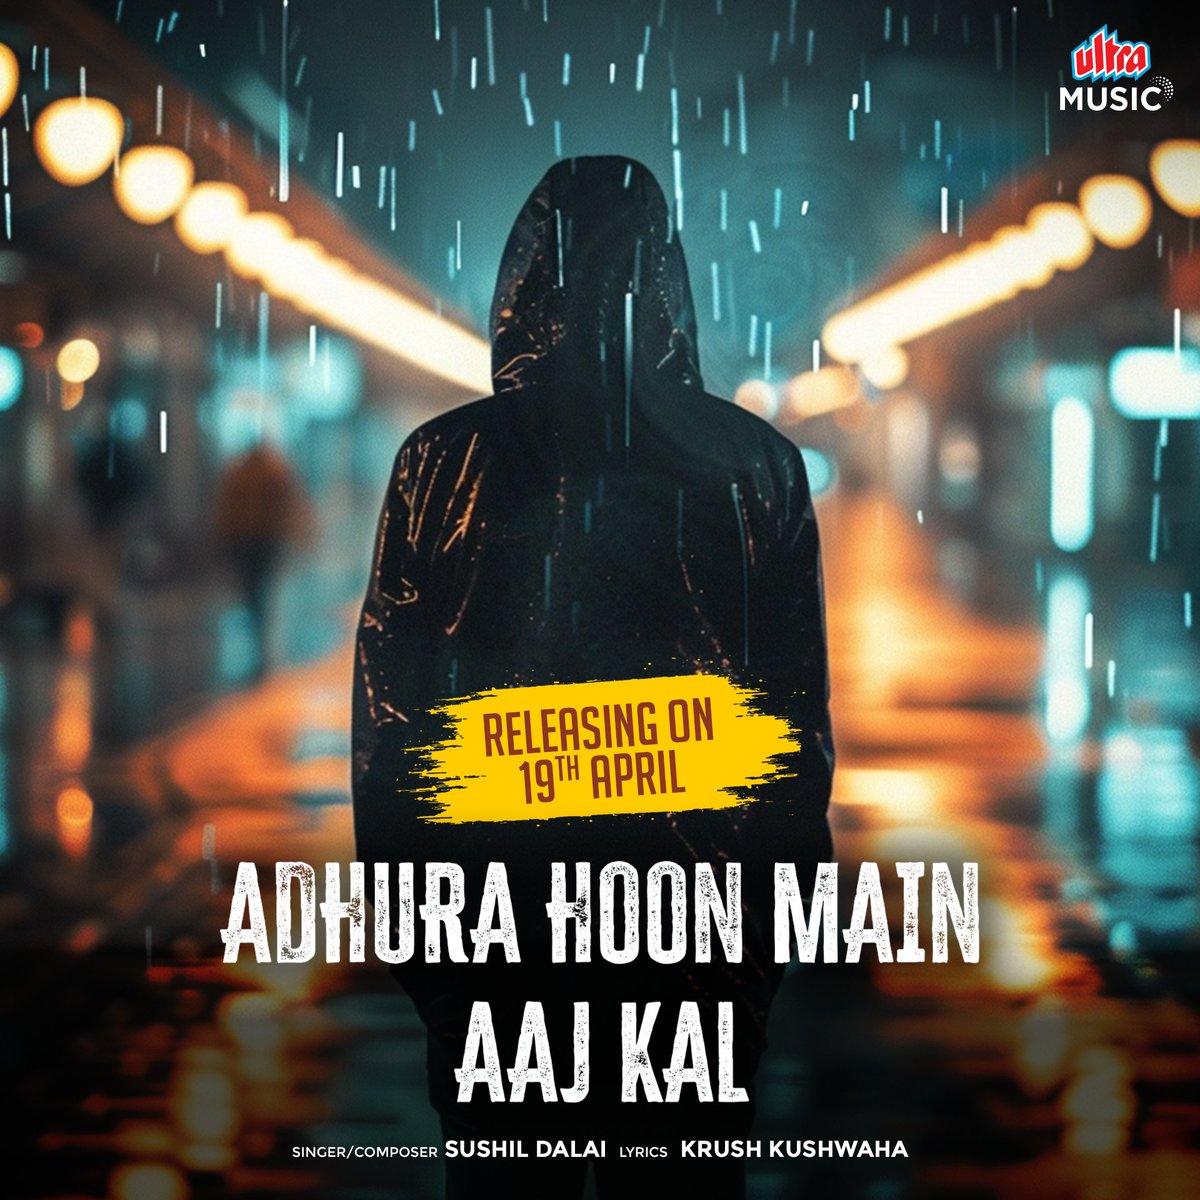 Prepare for the emotional journey like a fading dream as 'Adhoora Mai Hu' echoes the bittersweet tale of a love left unfinished. Releasing on the 19th to awaken your heart.

#AdhooraMaiHu #sadsong #newsong #Hindisong #ultramusic